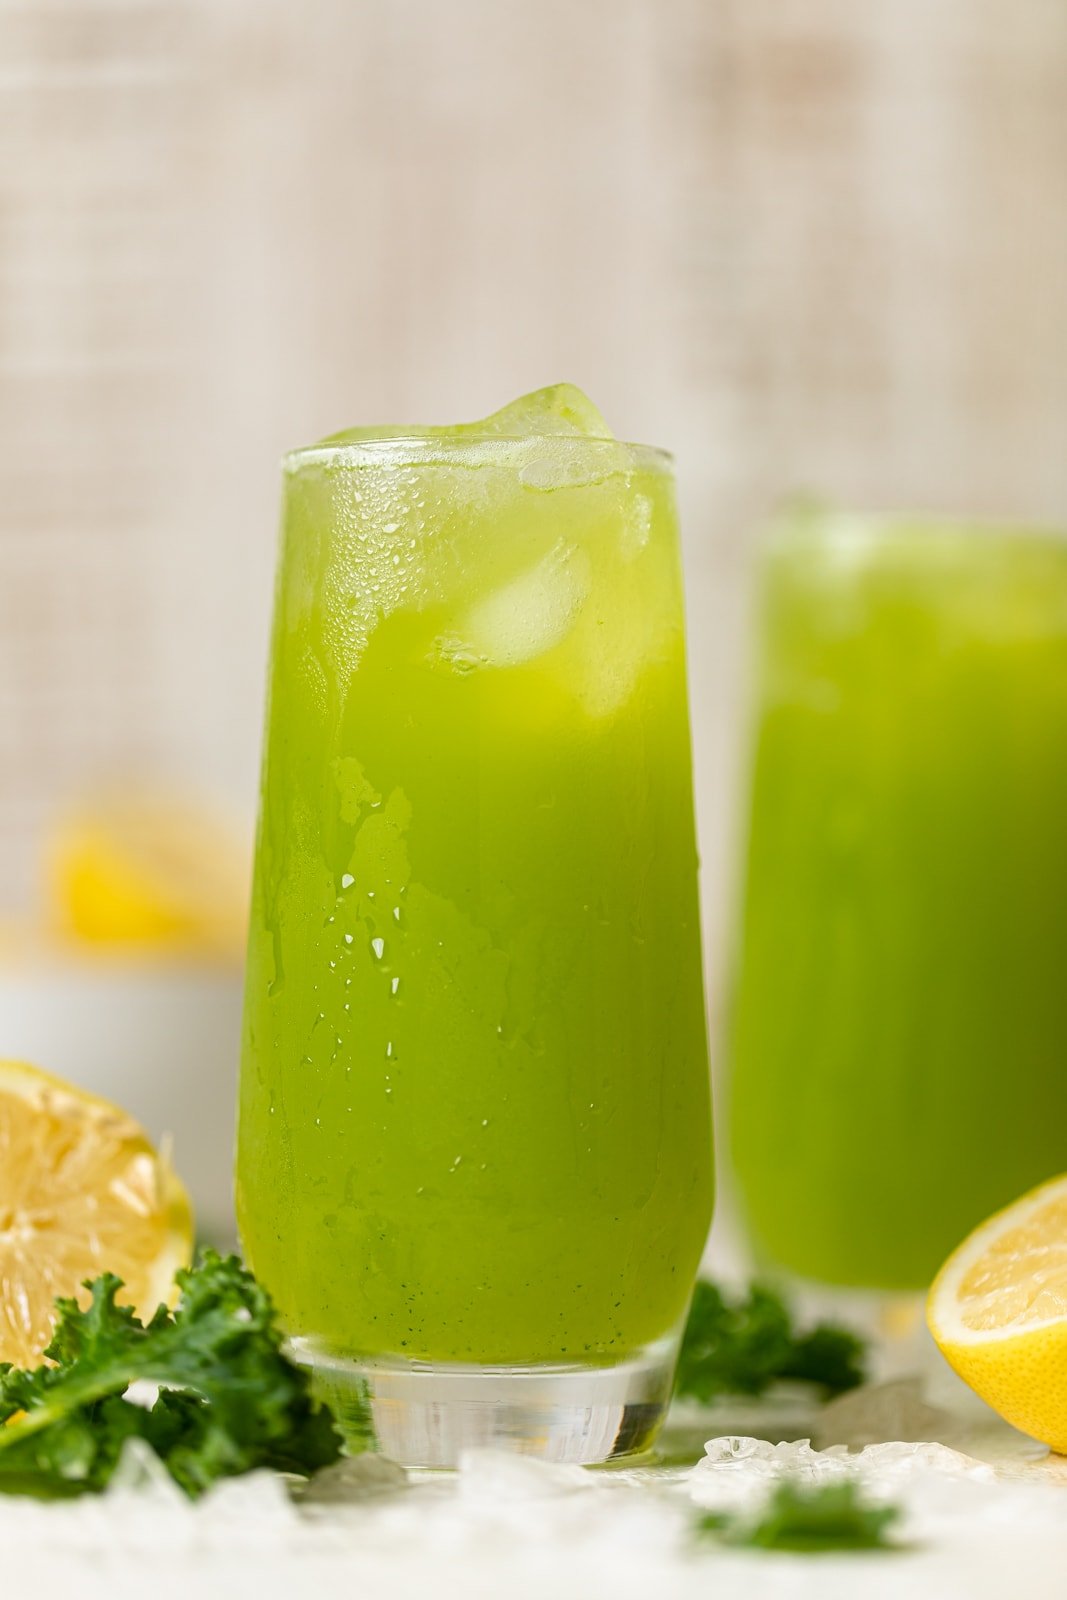 Two glasses of bright green Kale Lemonade with ice